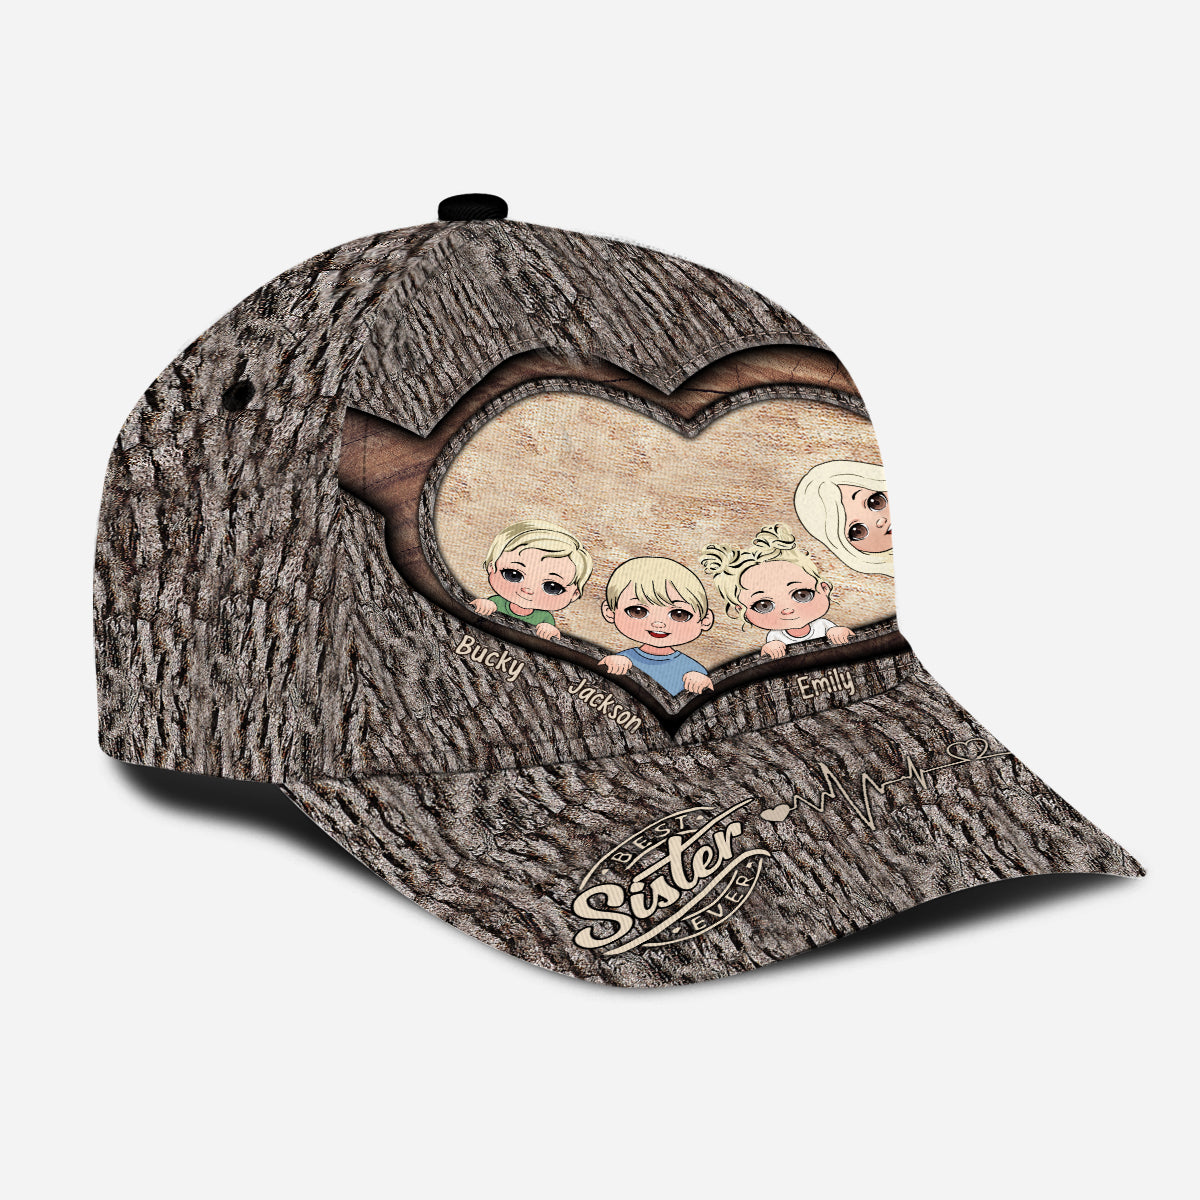 Discover Whenever You Touch This Heart - Gift for dad, grandma Personalized Classic Cap